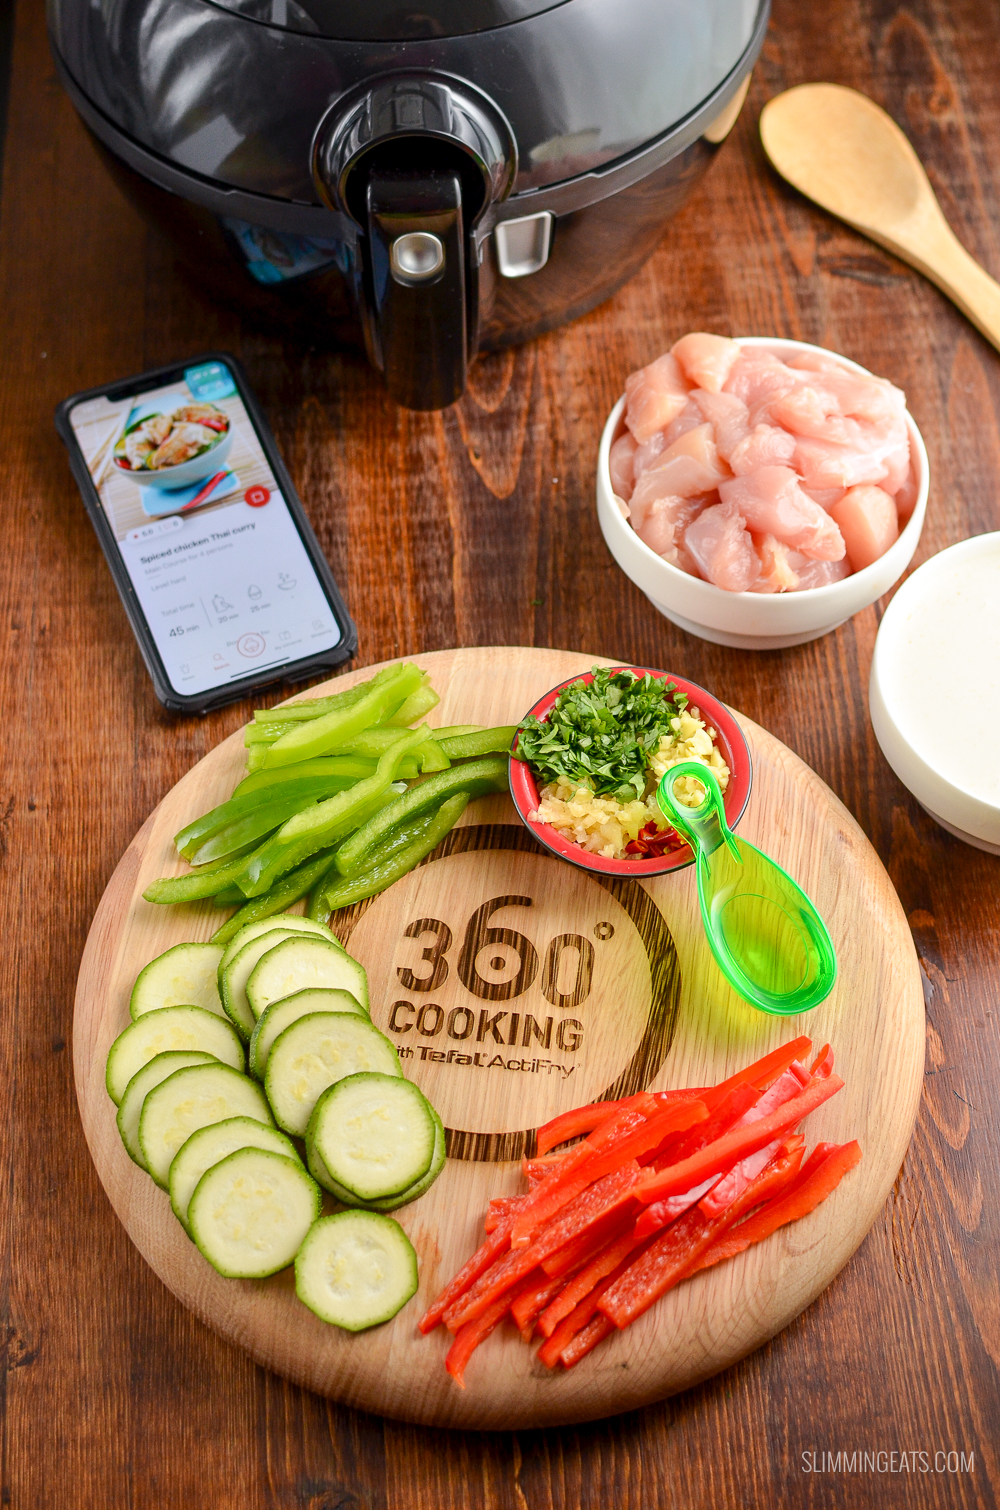 ingredients on a wooden board for Spiced Thai Chicken Curry with Actifry and iPhone displaying recipe